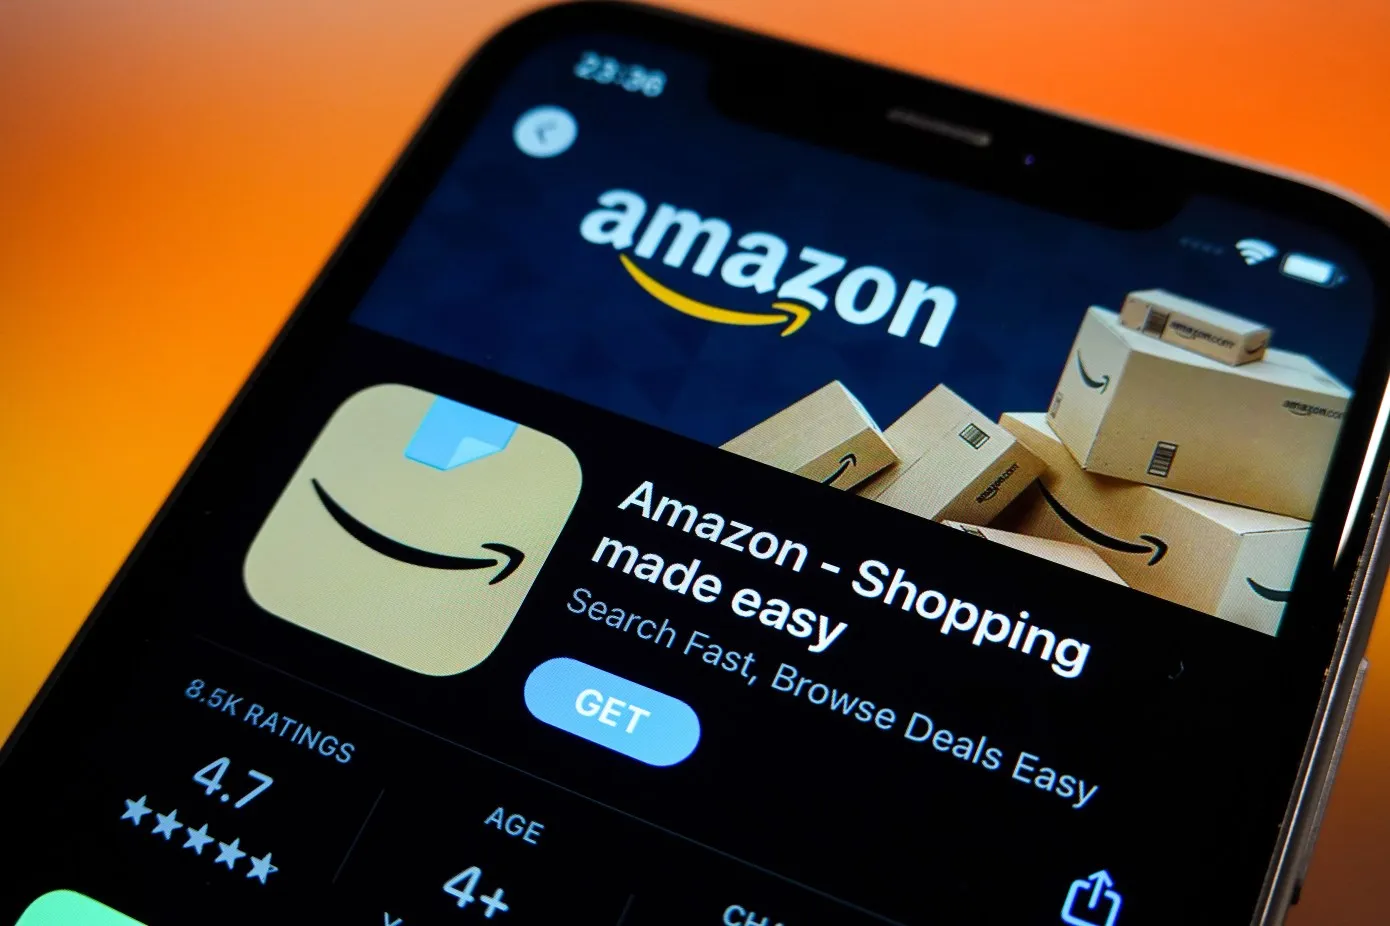 The FTC has just hit Amazon with a major antitrust lawsuit